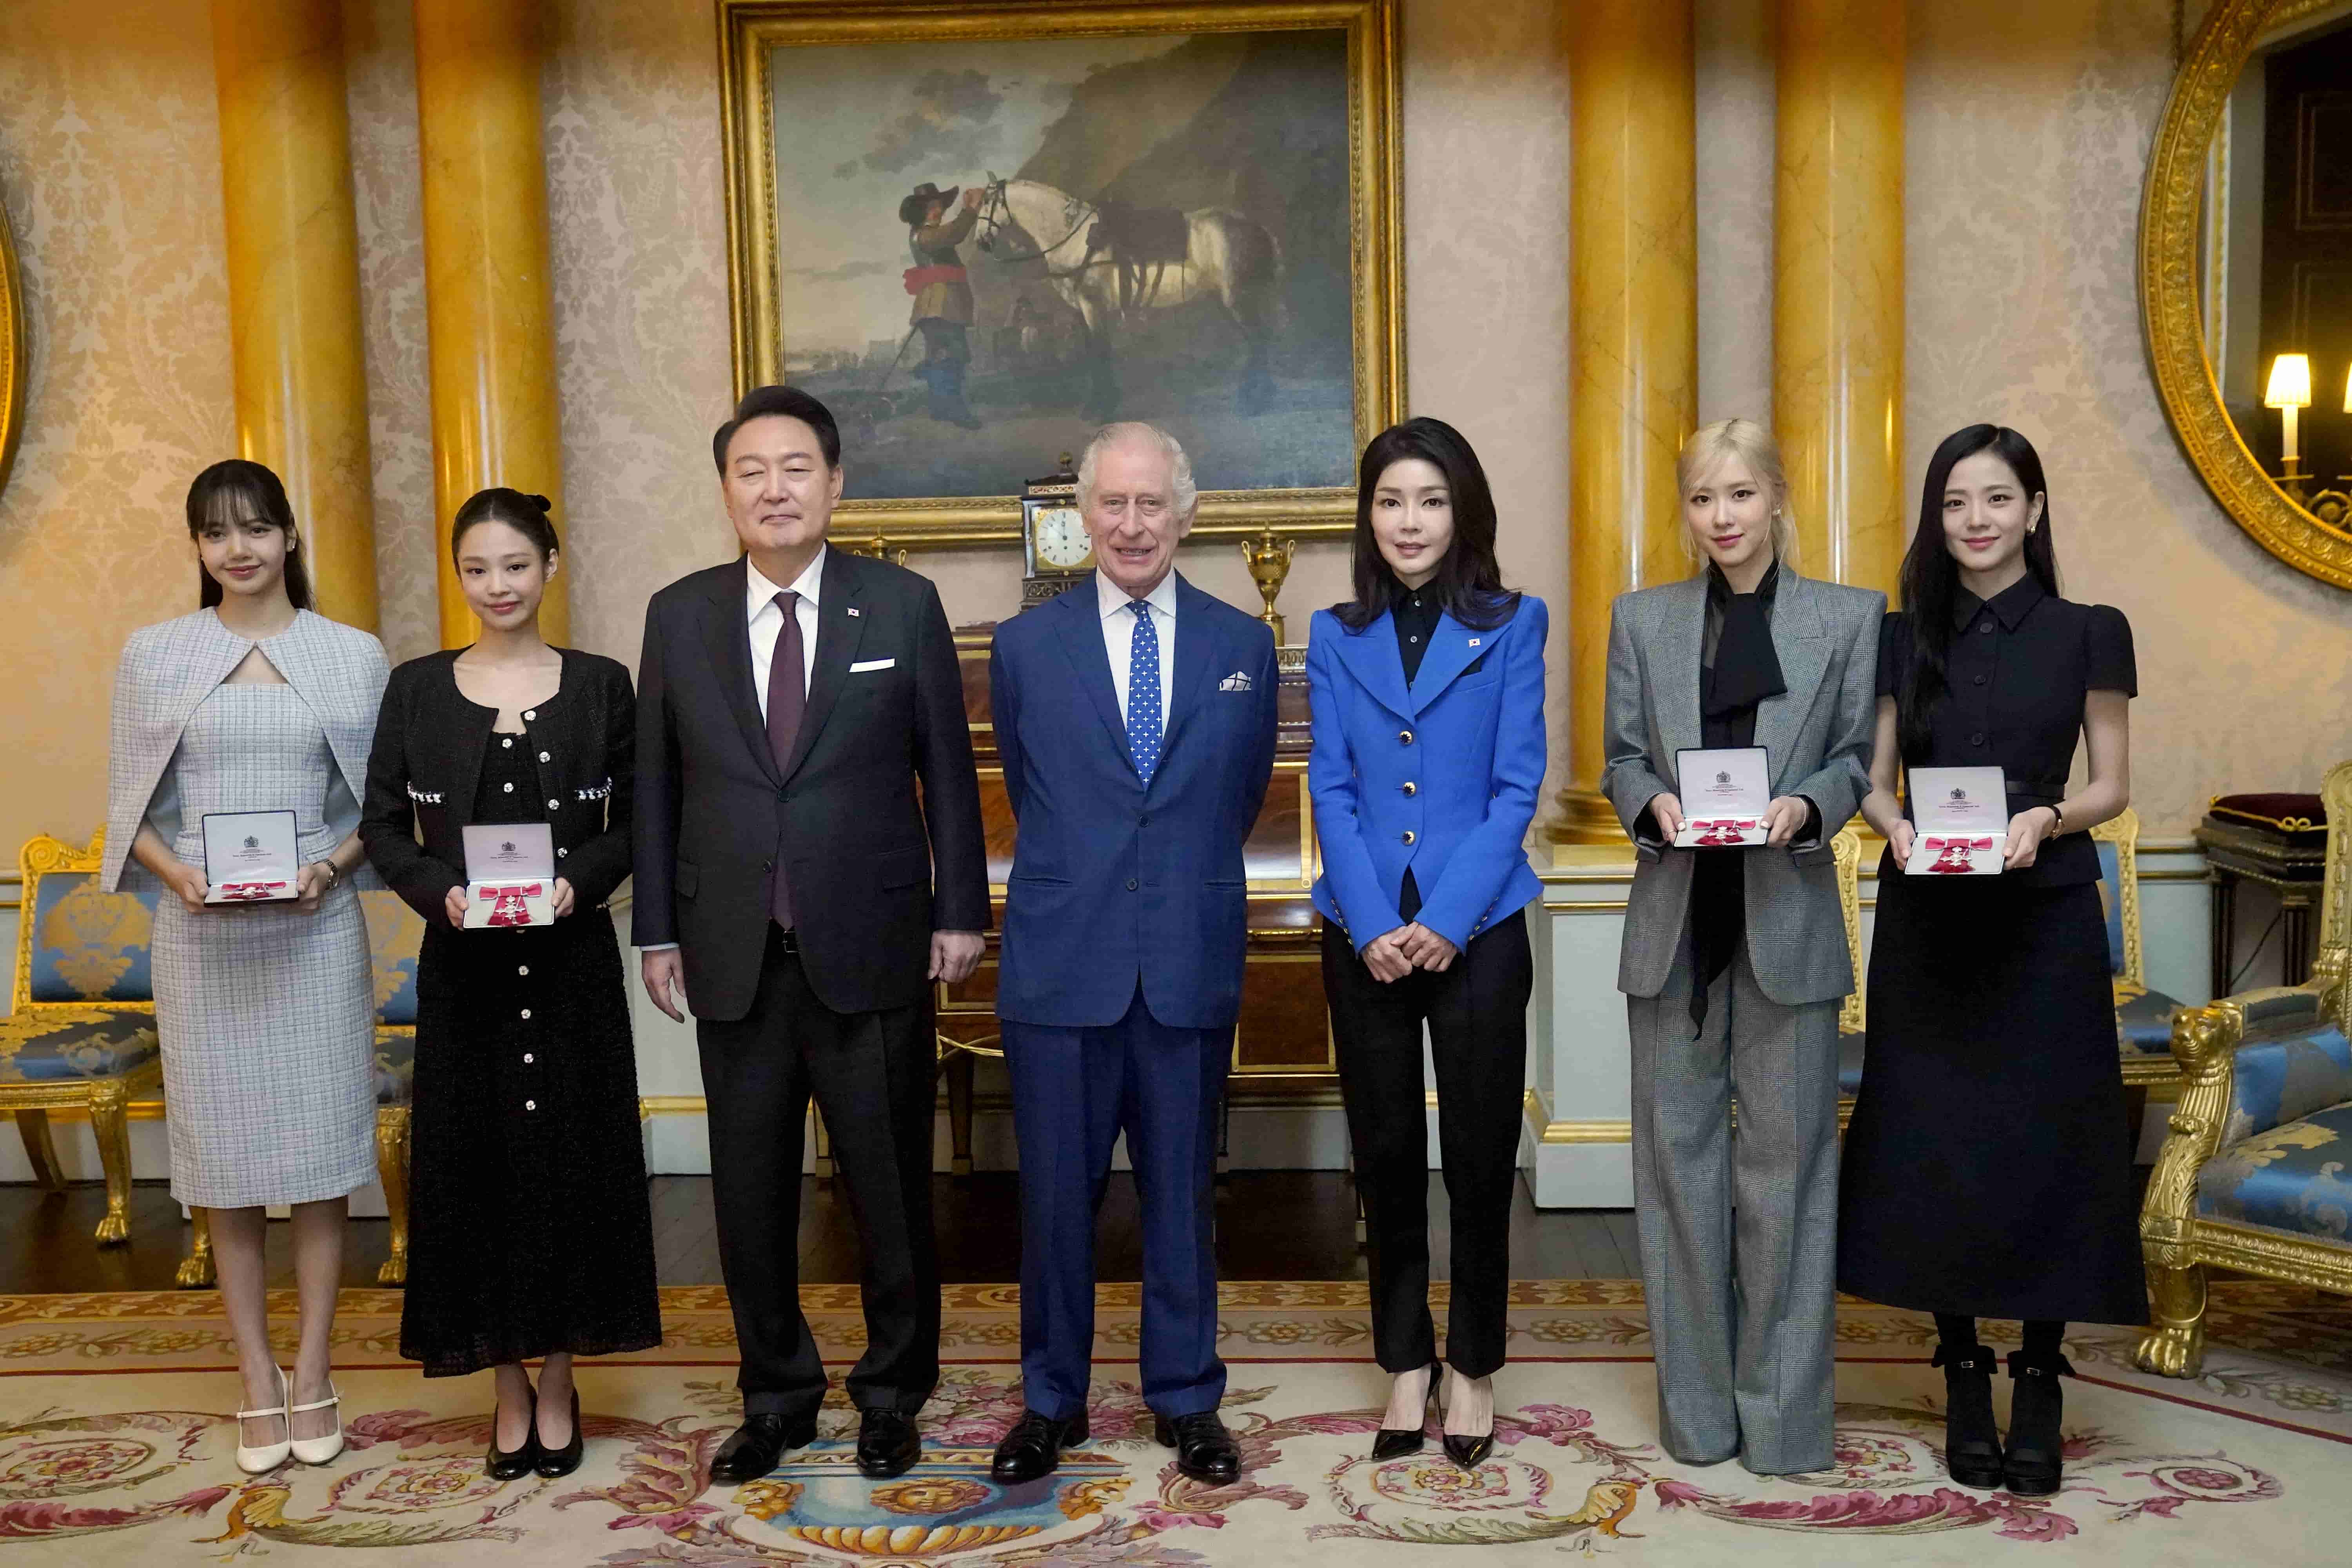 The women were joined by South Koreas president, Yoon Suk Yeol, and his wife, Kim Keon Hee, for the ceremony. Getty Images